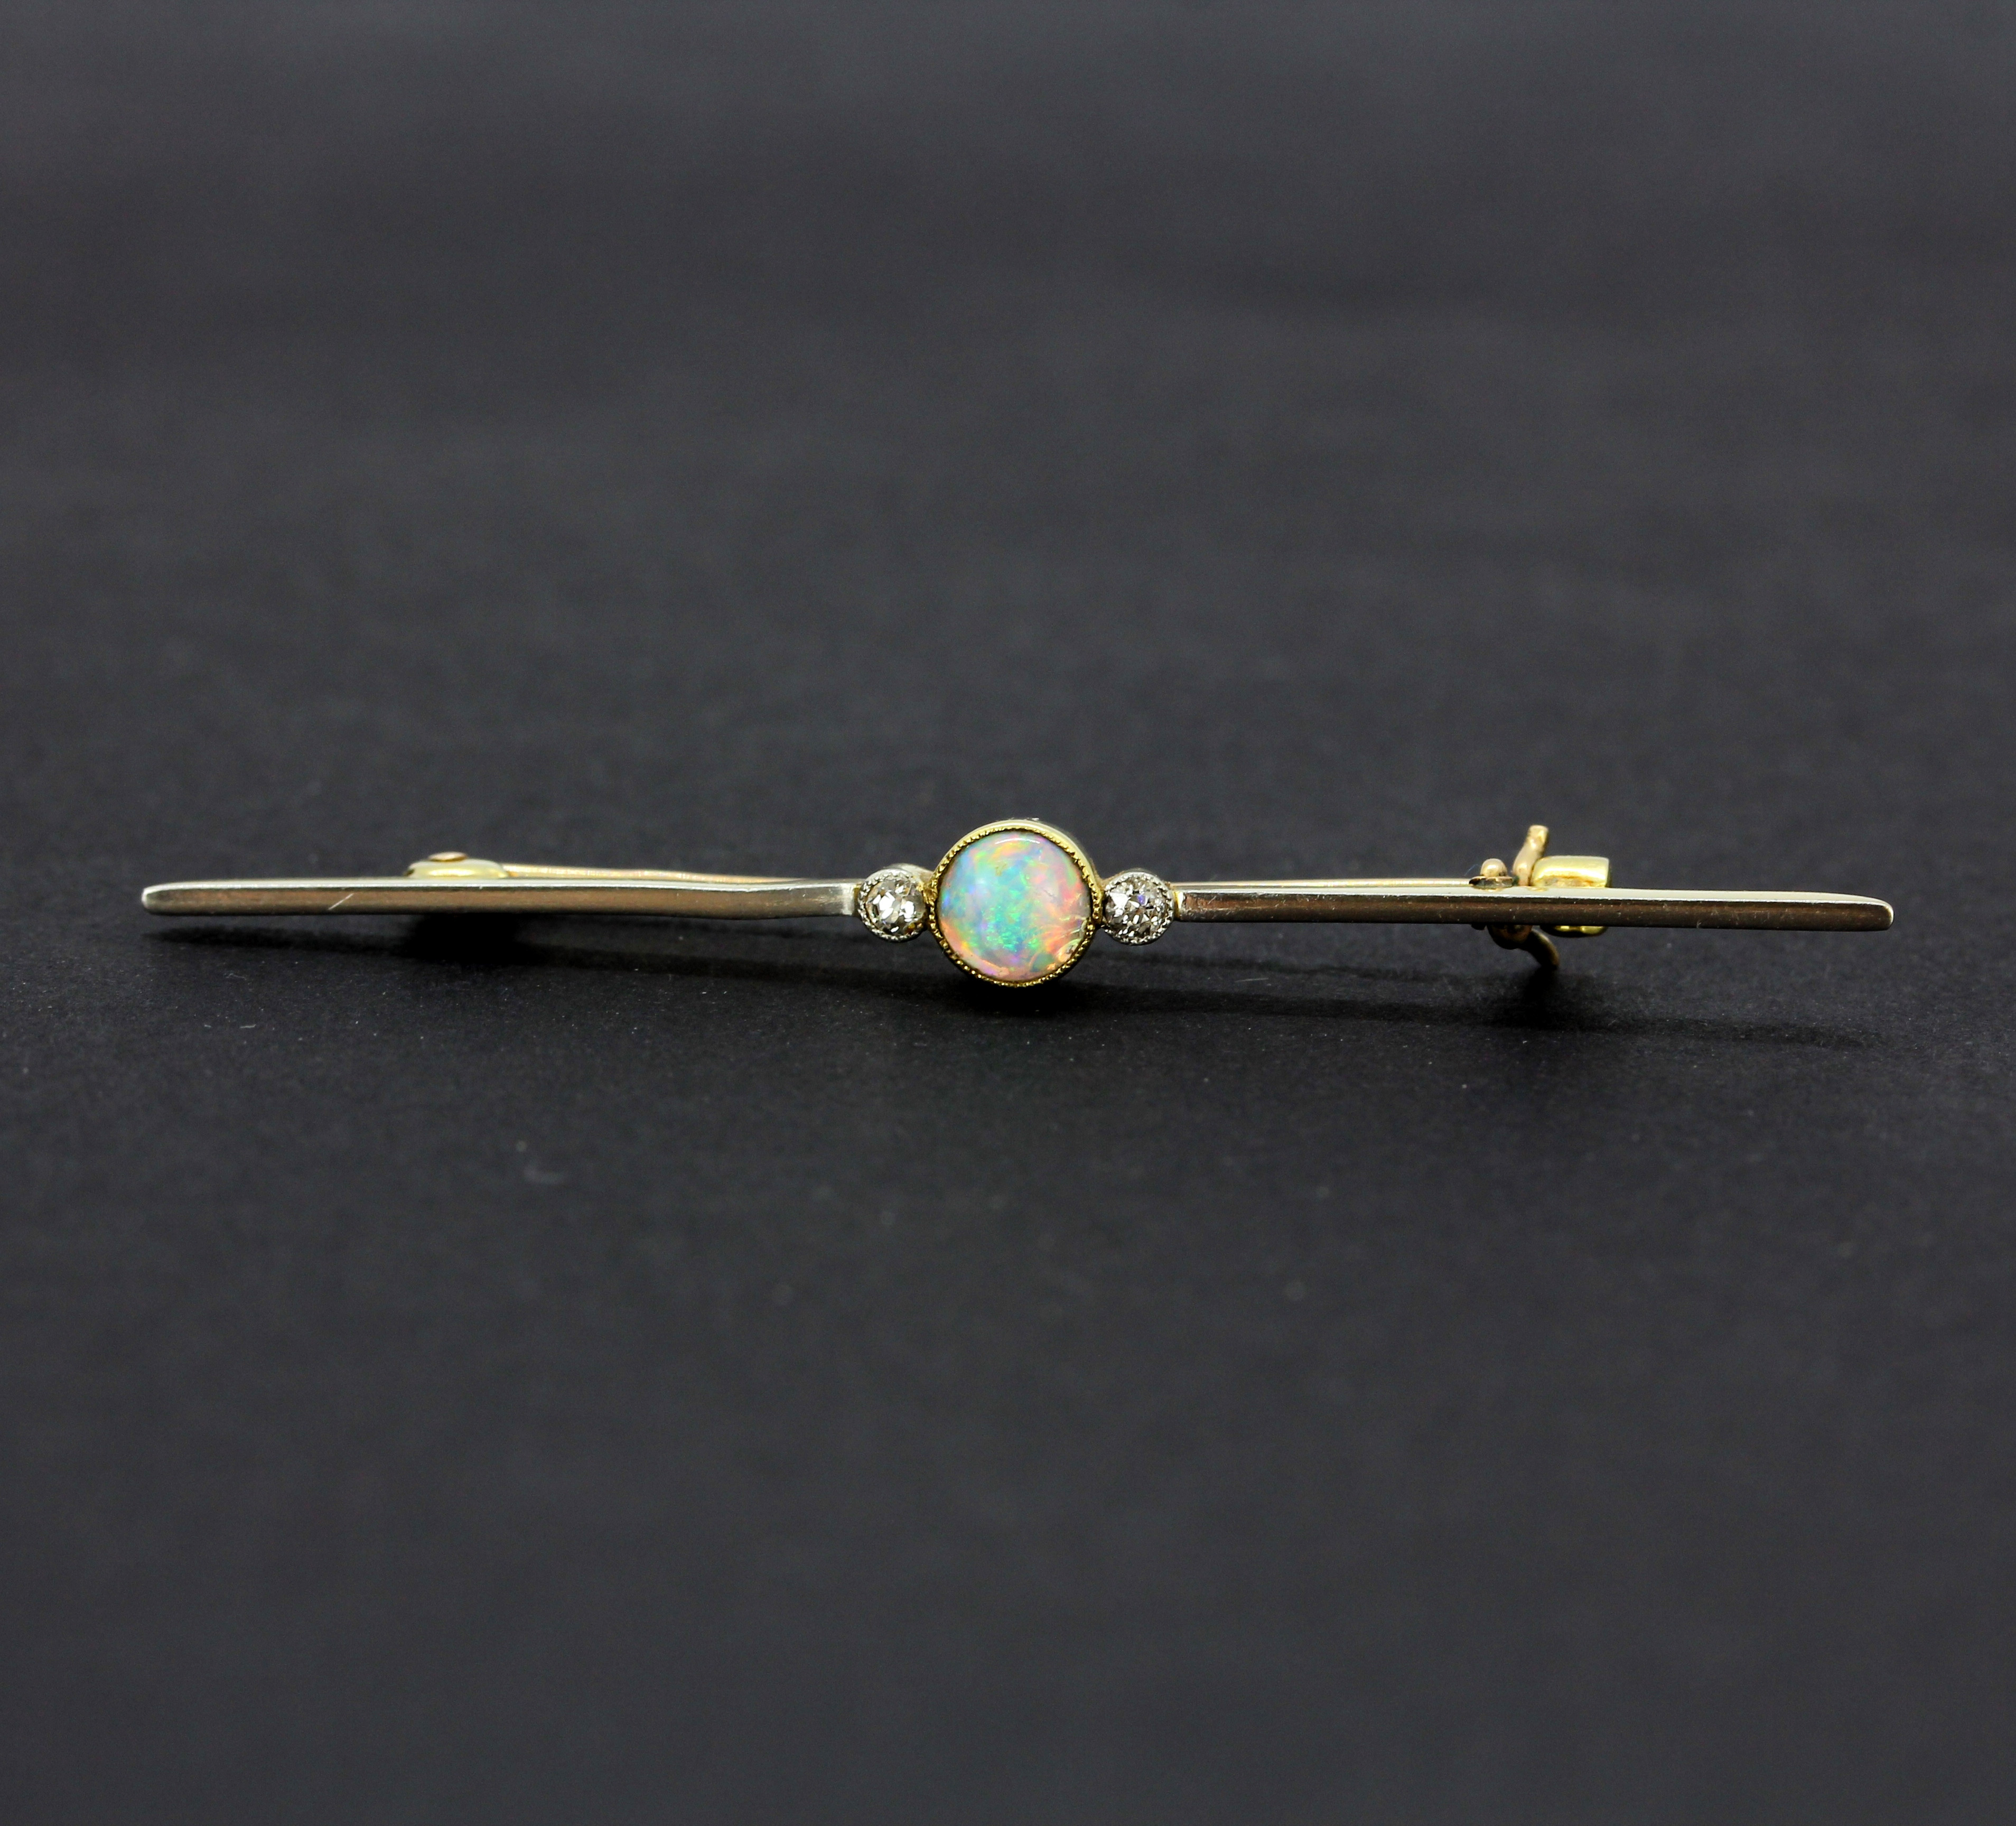 A 15ct yellow and white gold opal and diamond set bar brooch, with 9ct yellow gold (stamped 9ct) - Image 4 of 6